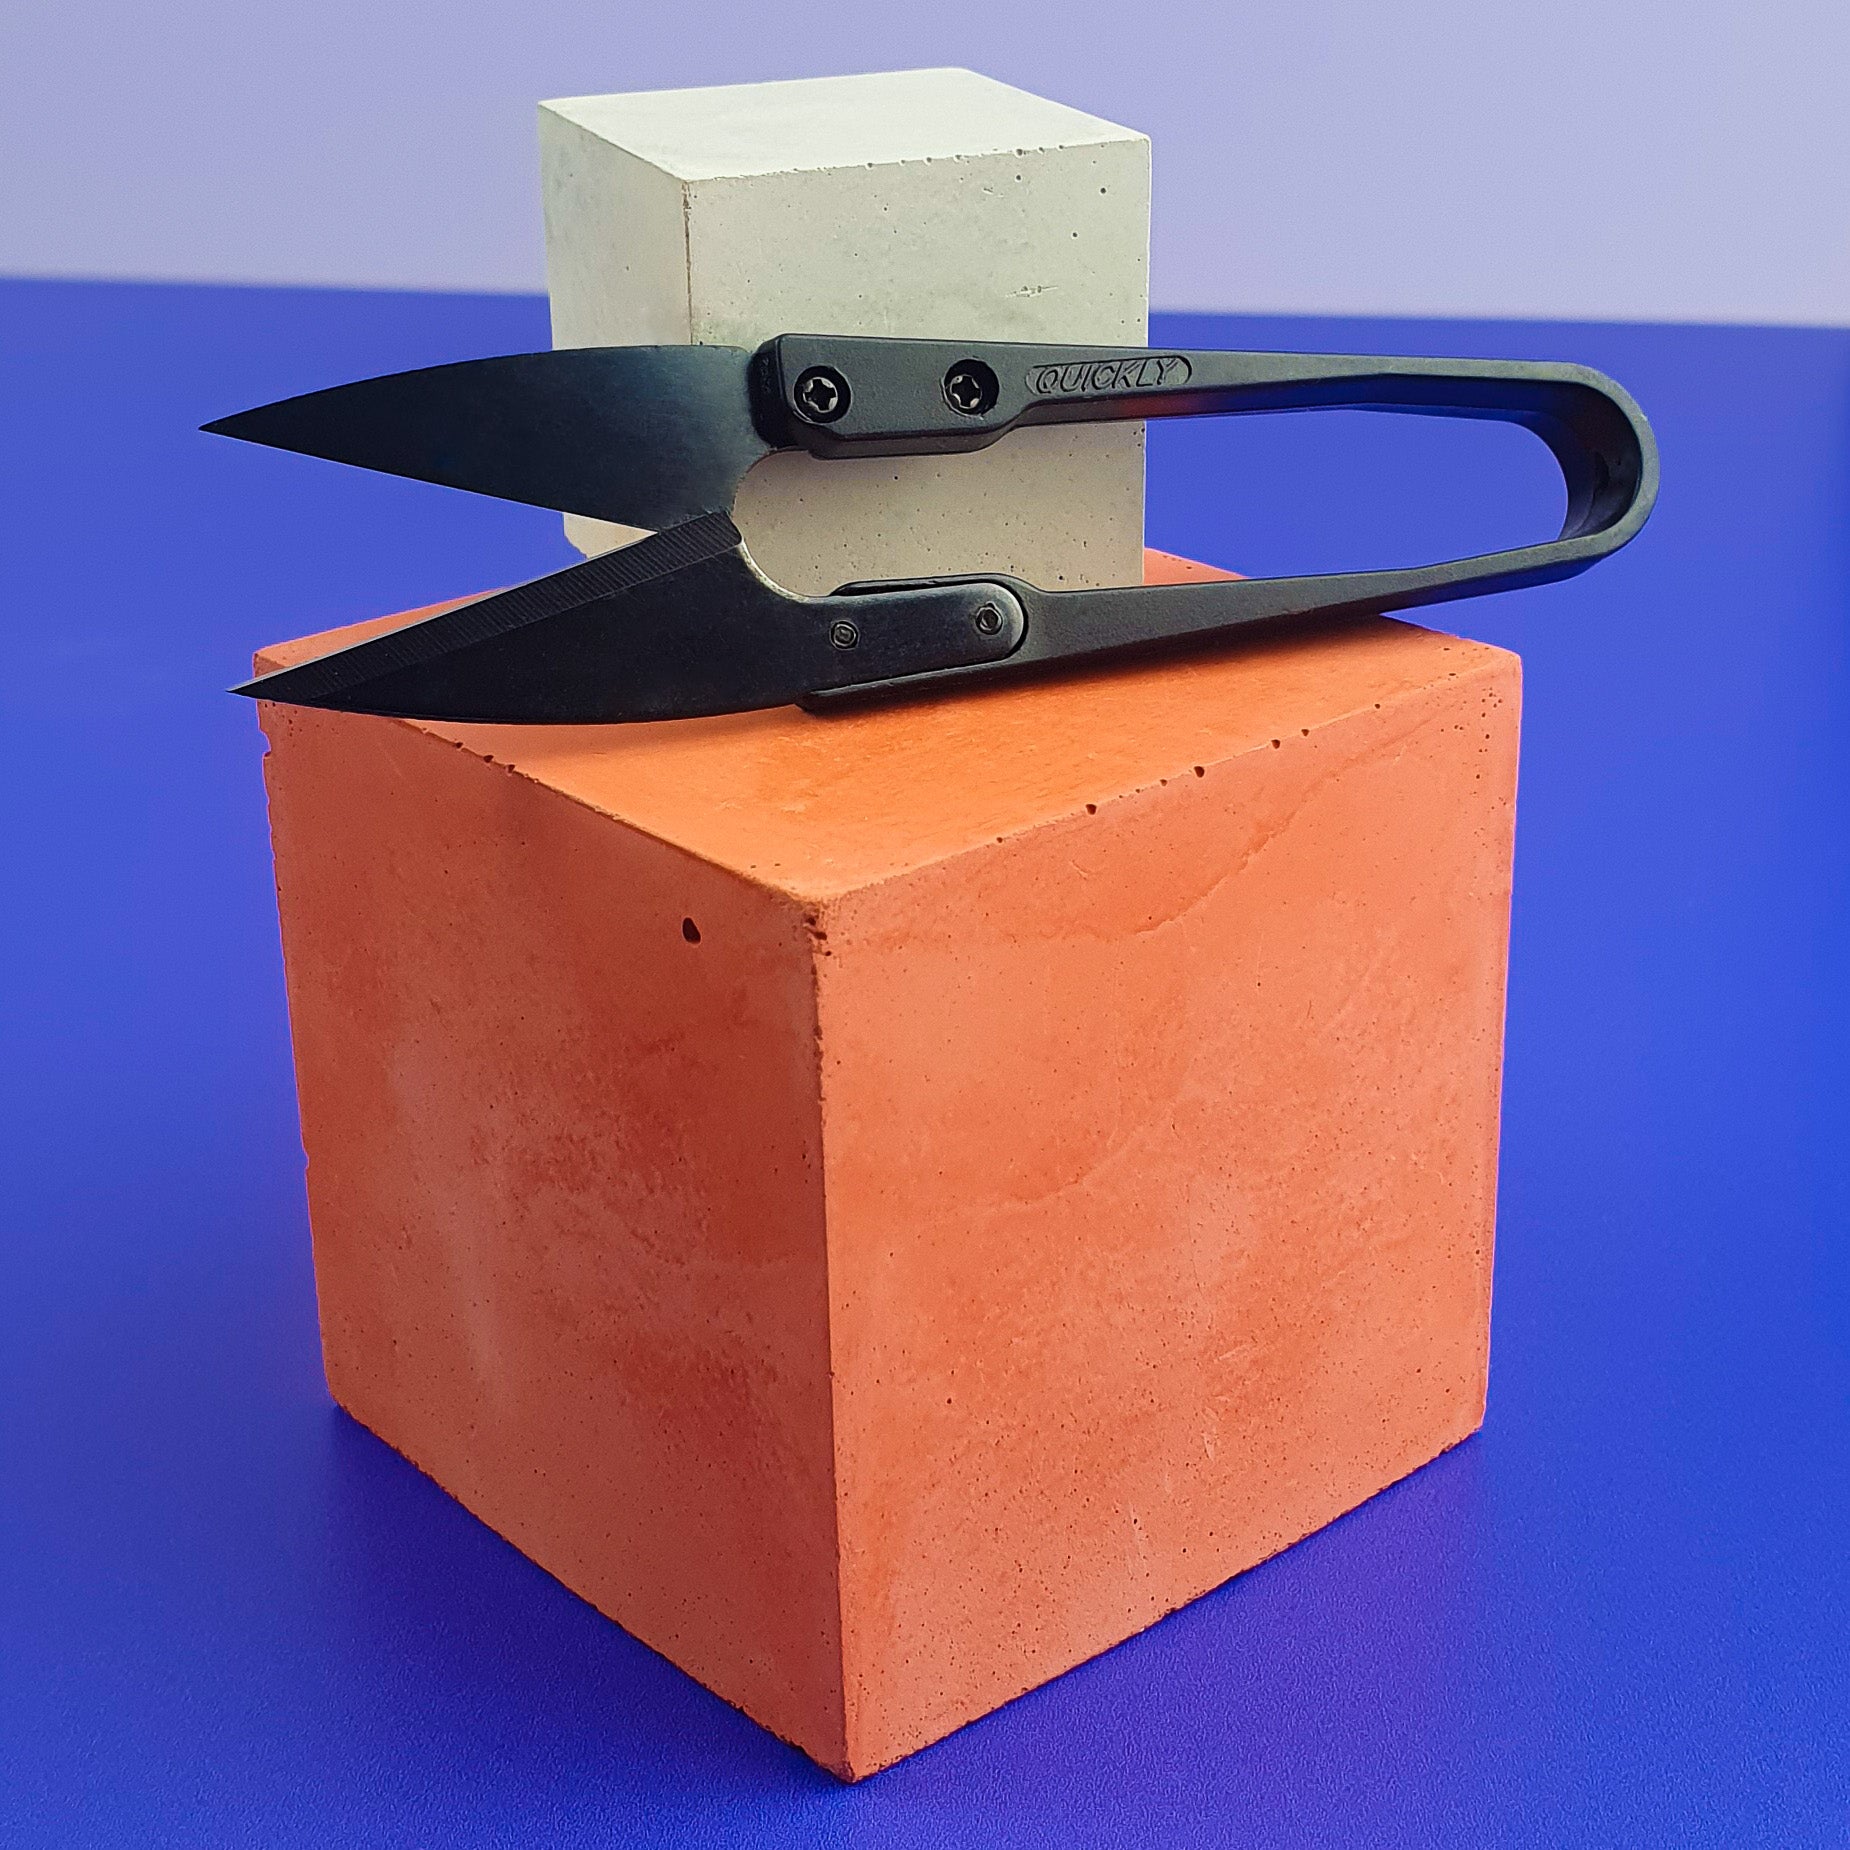 Black Thread Cutters resting on mini concrete orange and grey cubes